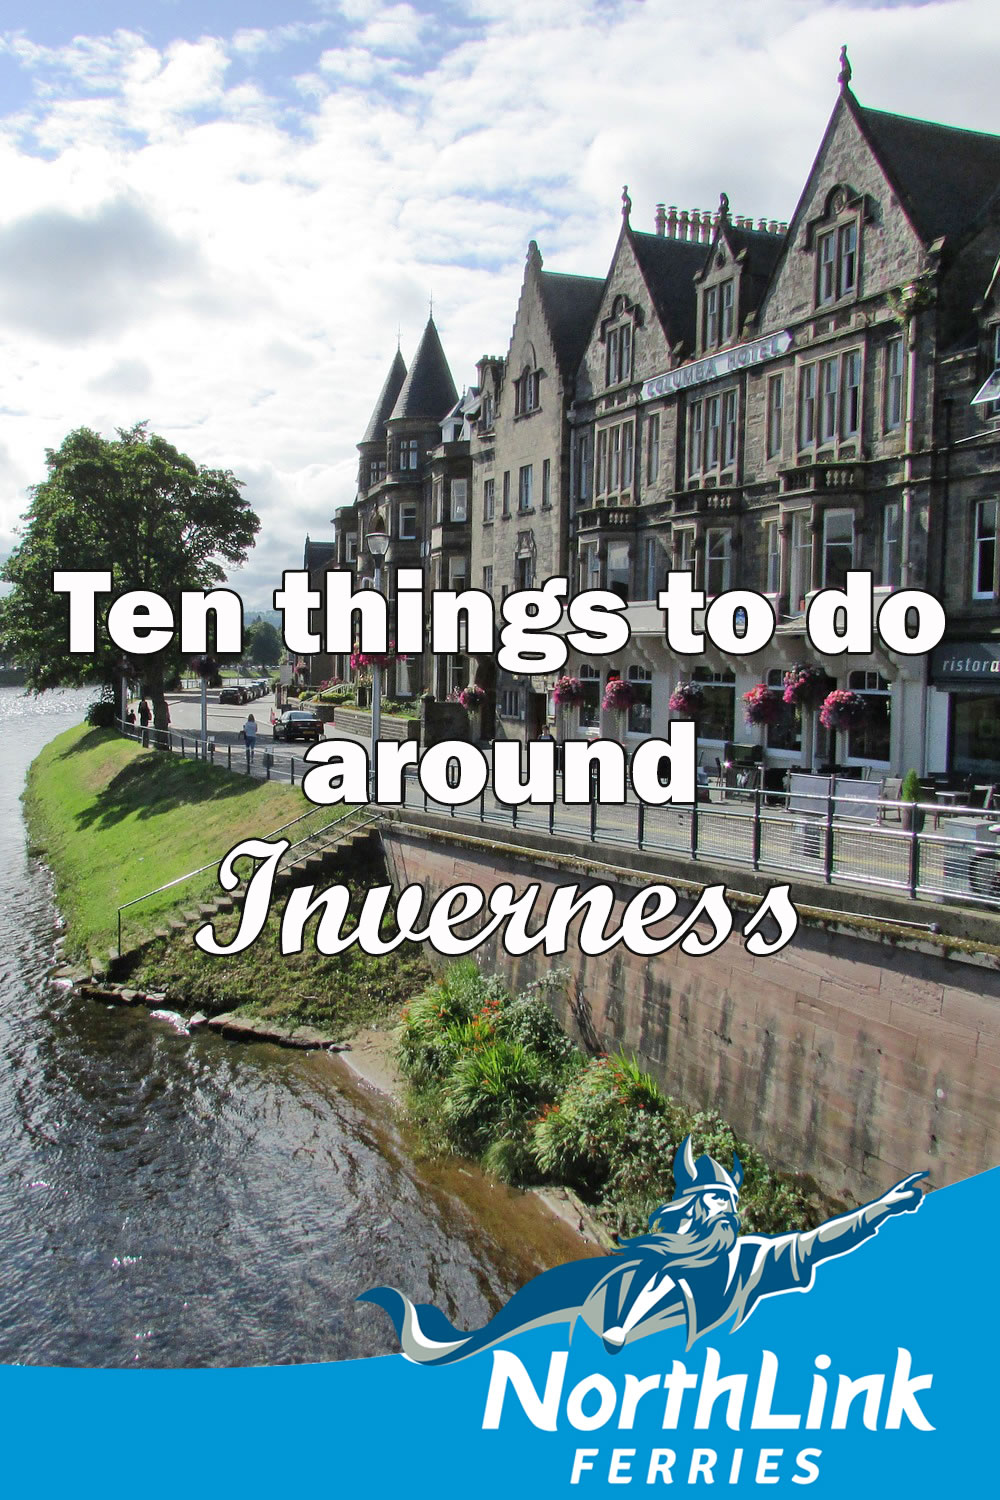 Ten things to do around Inverness